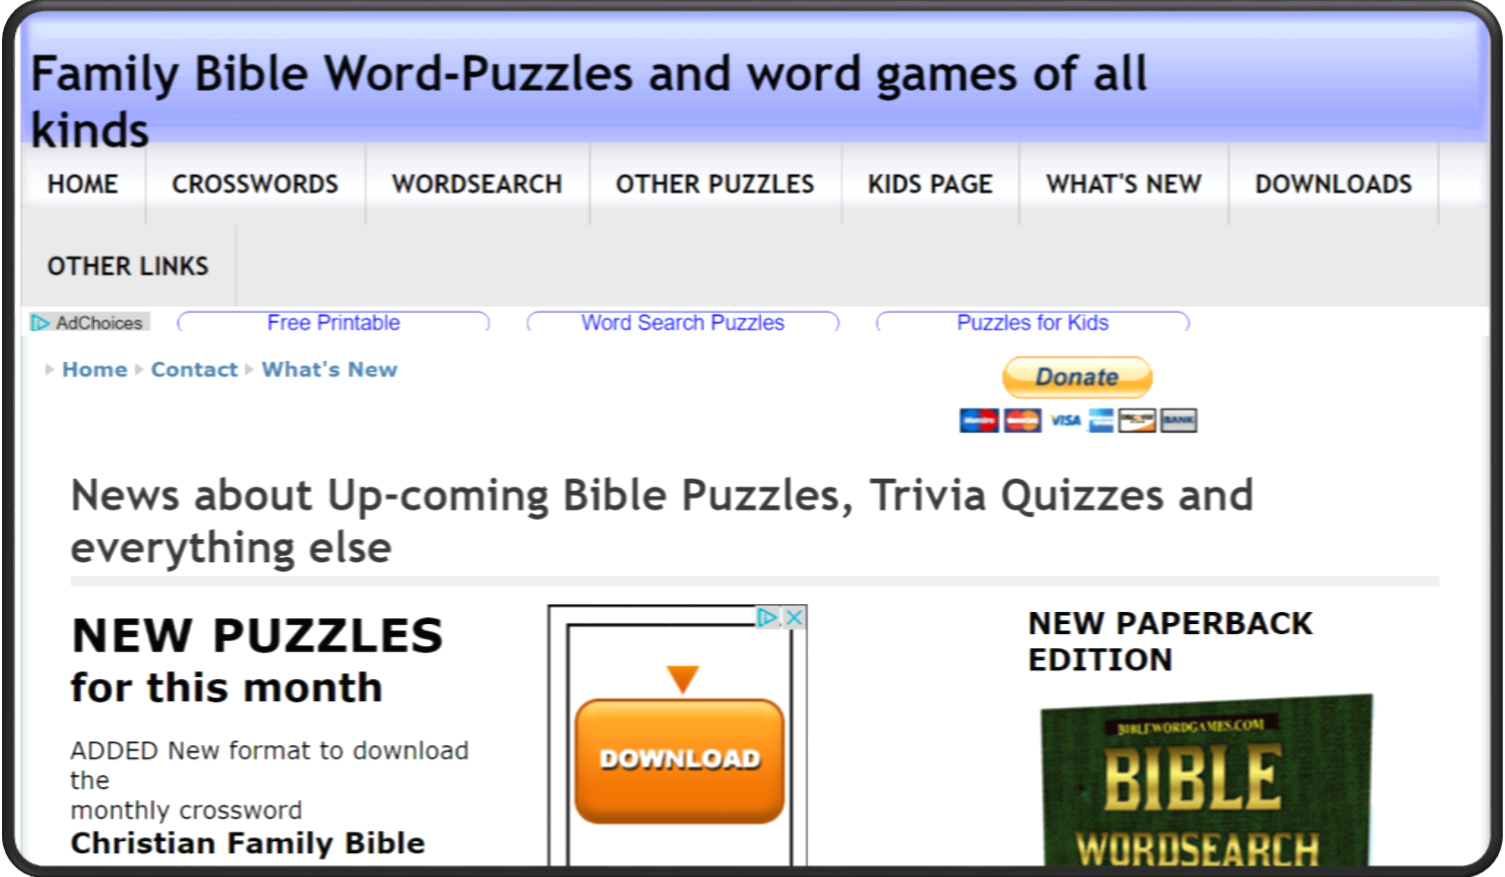 Games - Bible Word Games biblewordgames.com Word Search Home Page │ Grace Truth Spirit GotLifeQuestions.com #GLQ (2.0.0).png